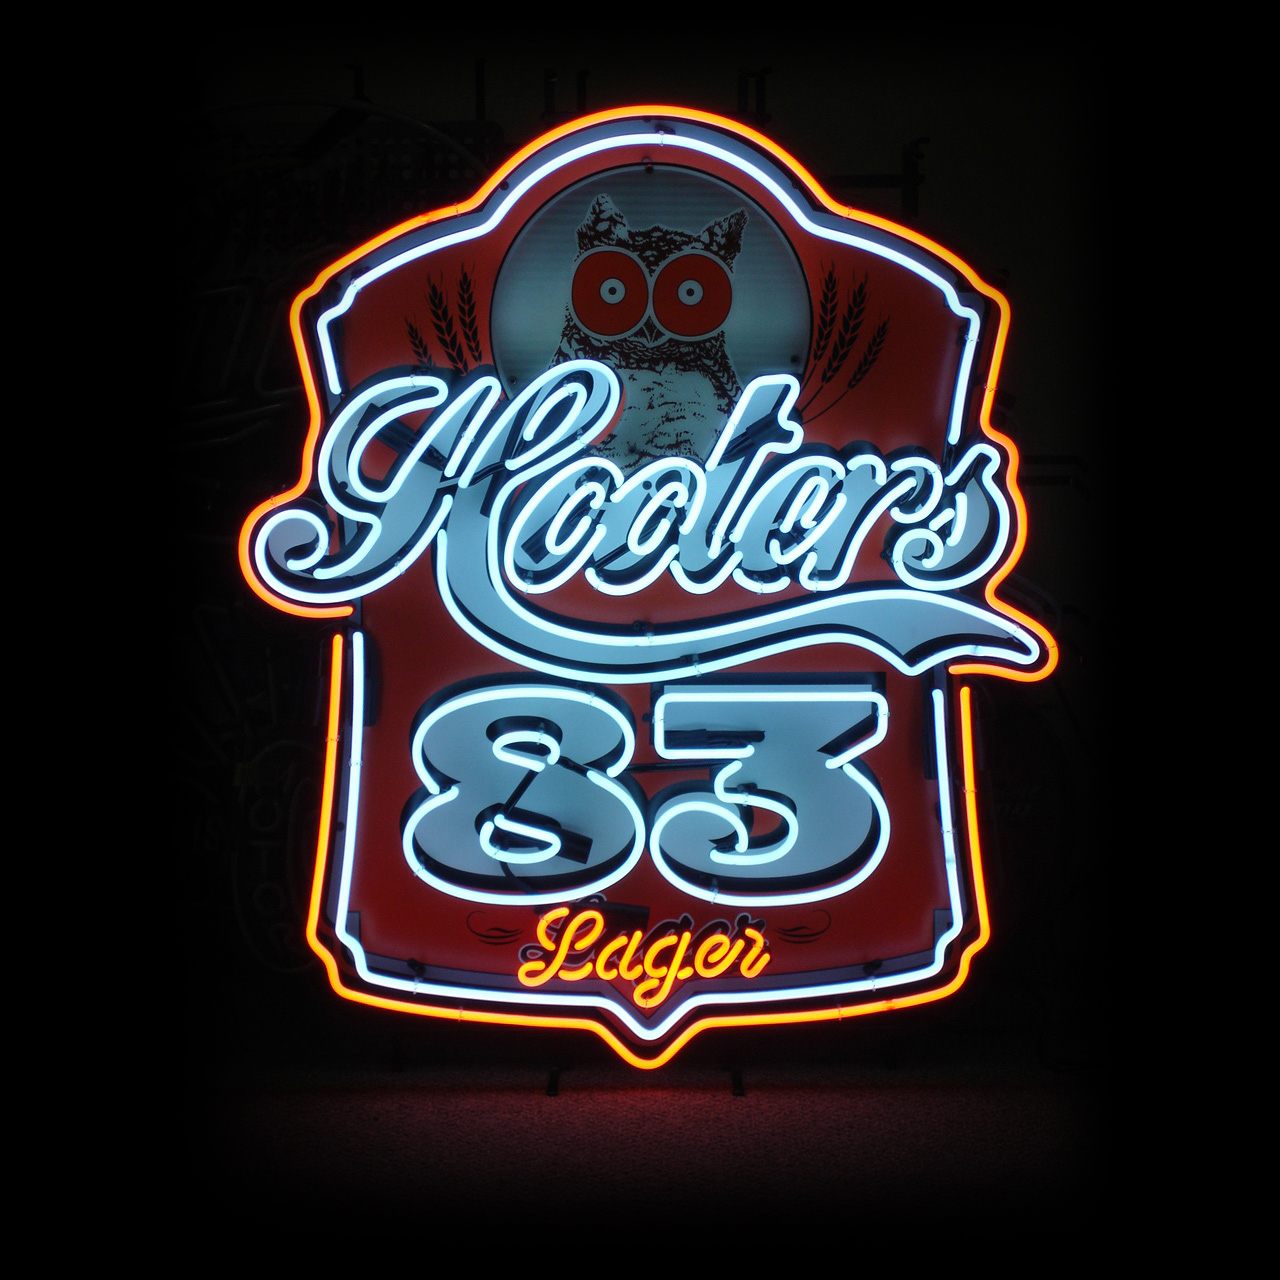 Hooters 83 Lager Custom Sign